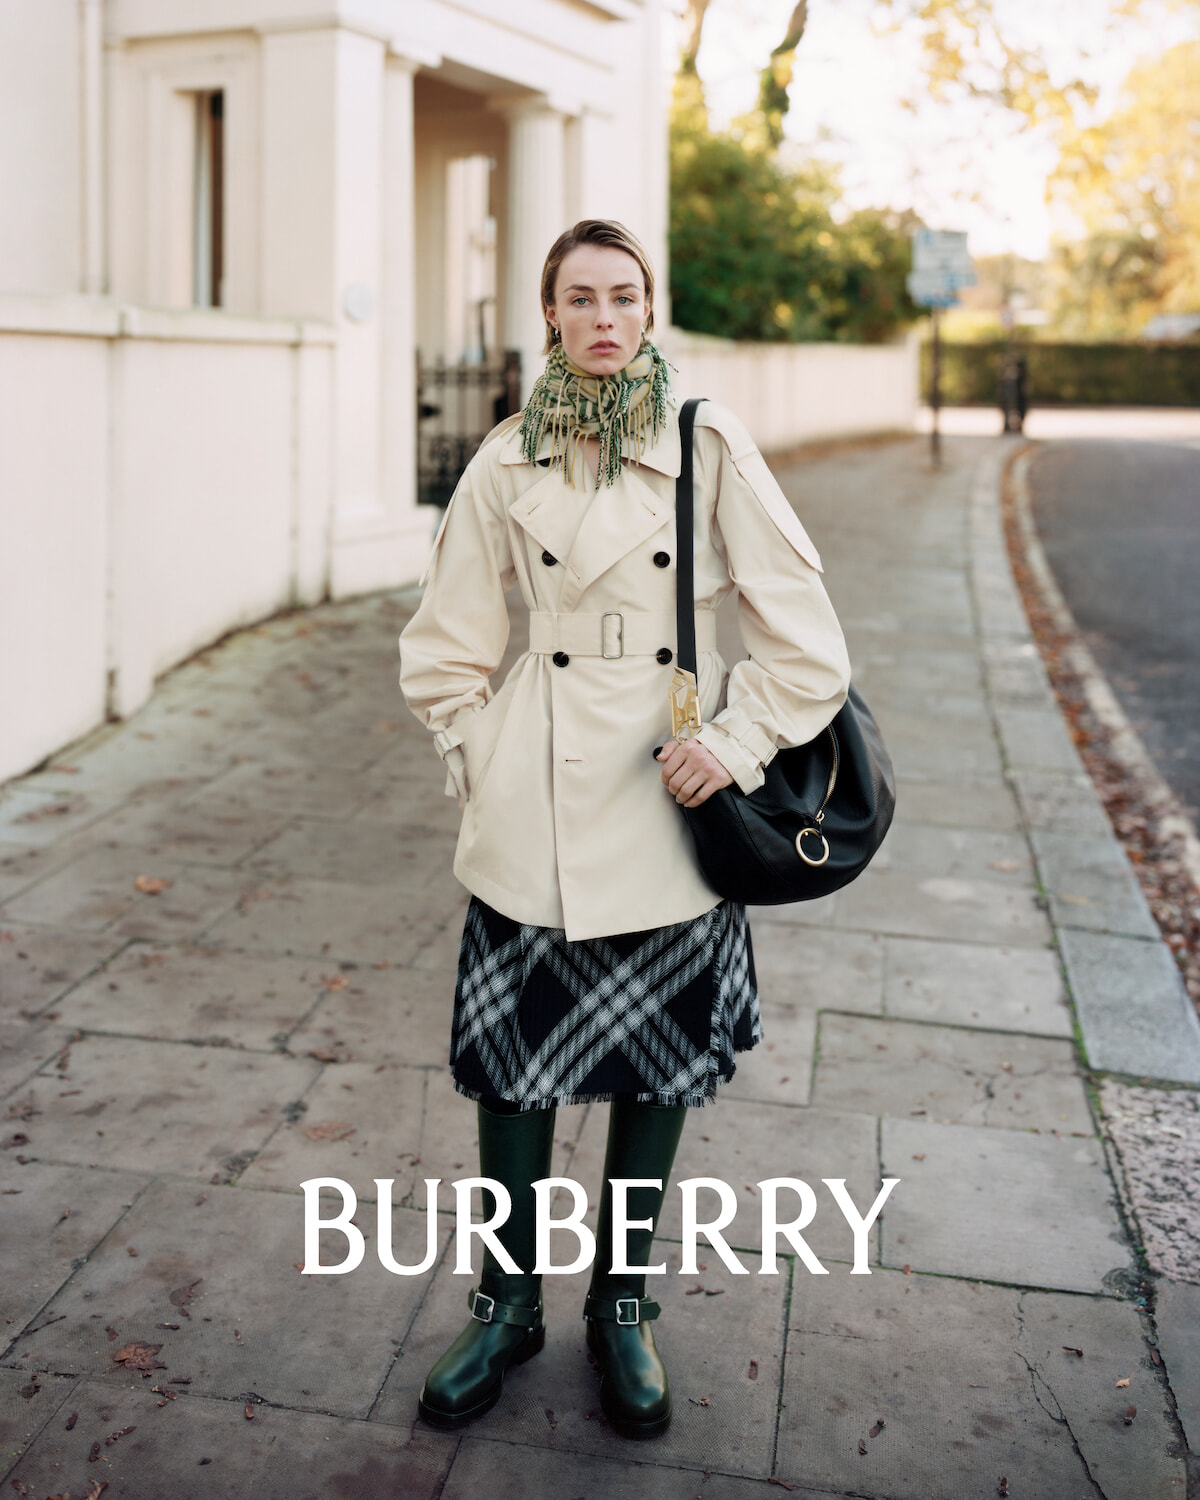 BURBERRY_2023_PRODUCT_STORIES_TRENCH_BURBERRY_RGB_CROPPED_4X5_015.jpg